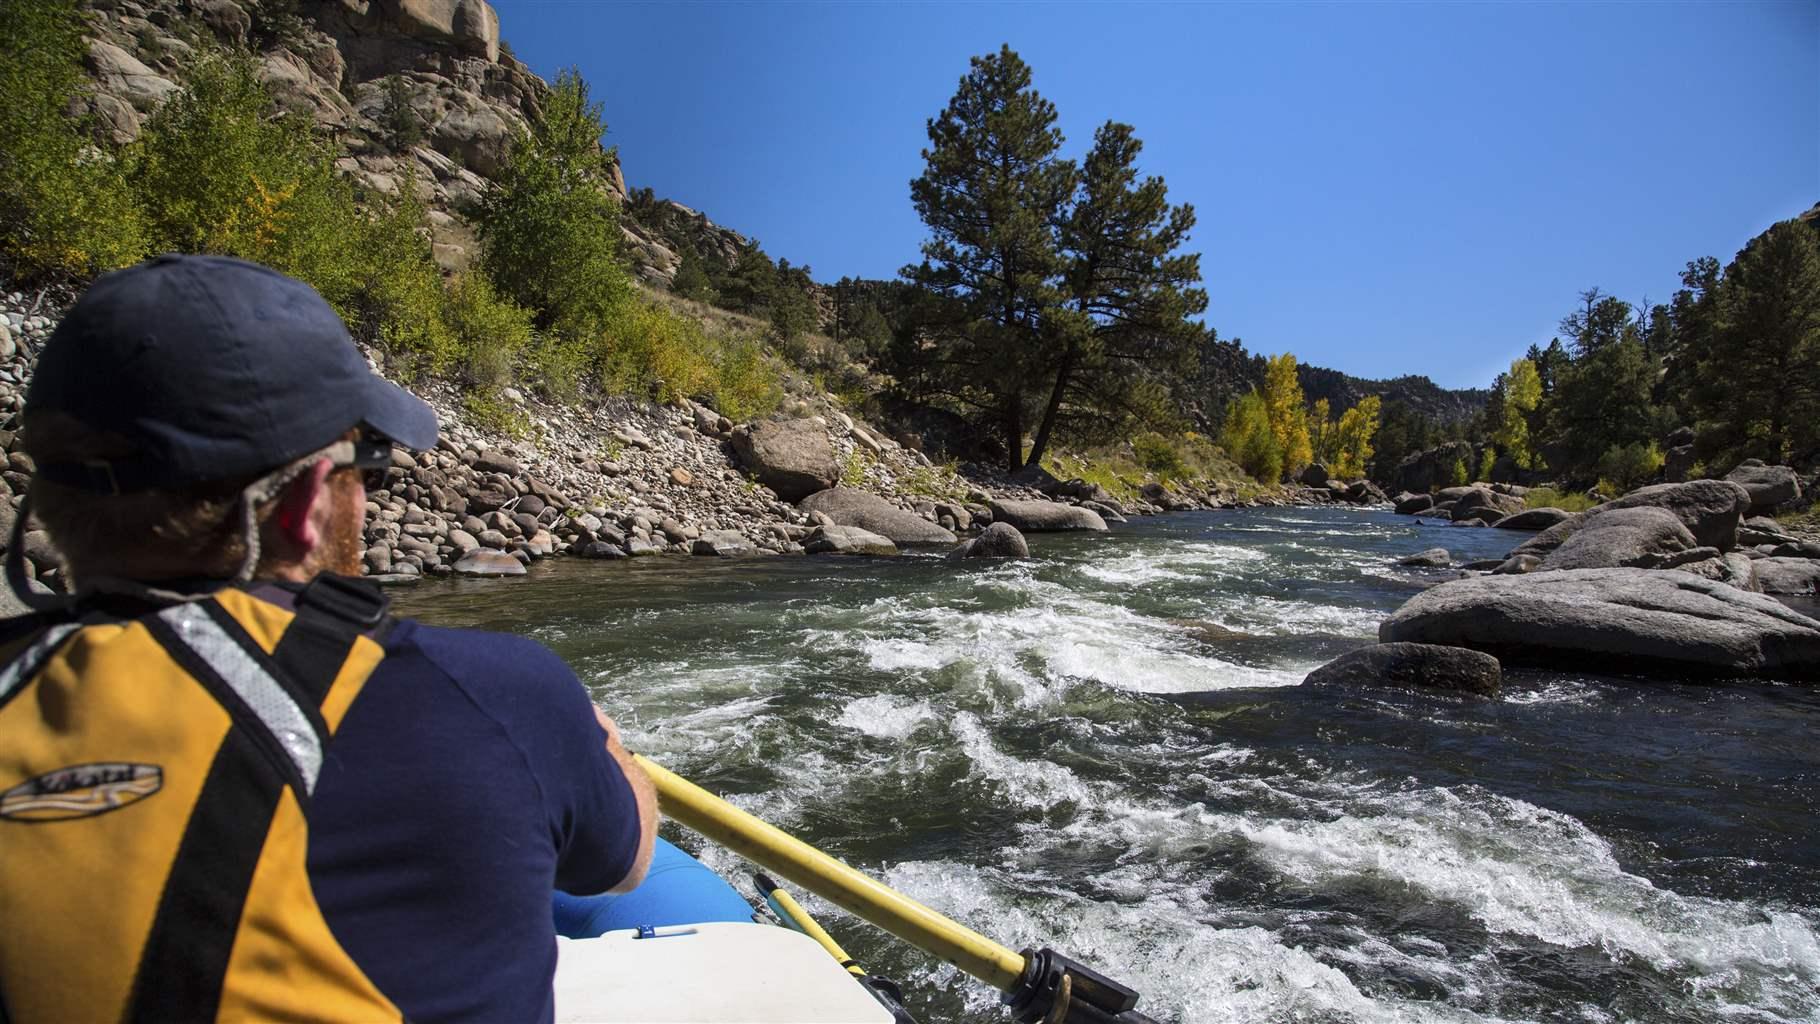 A rafter navigates rapids on the Arkansas River in Colorado’s Browns Canyon. 